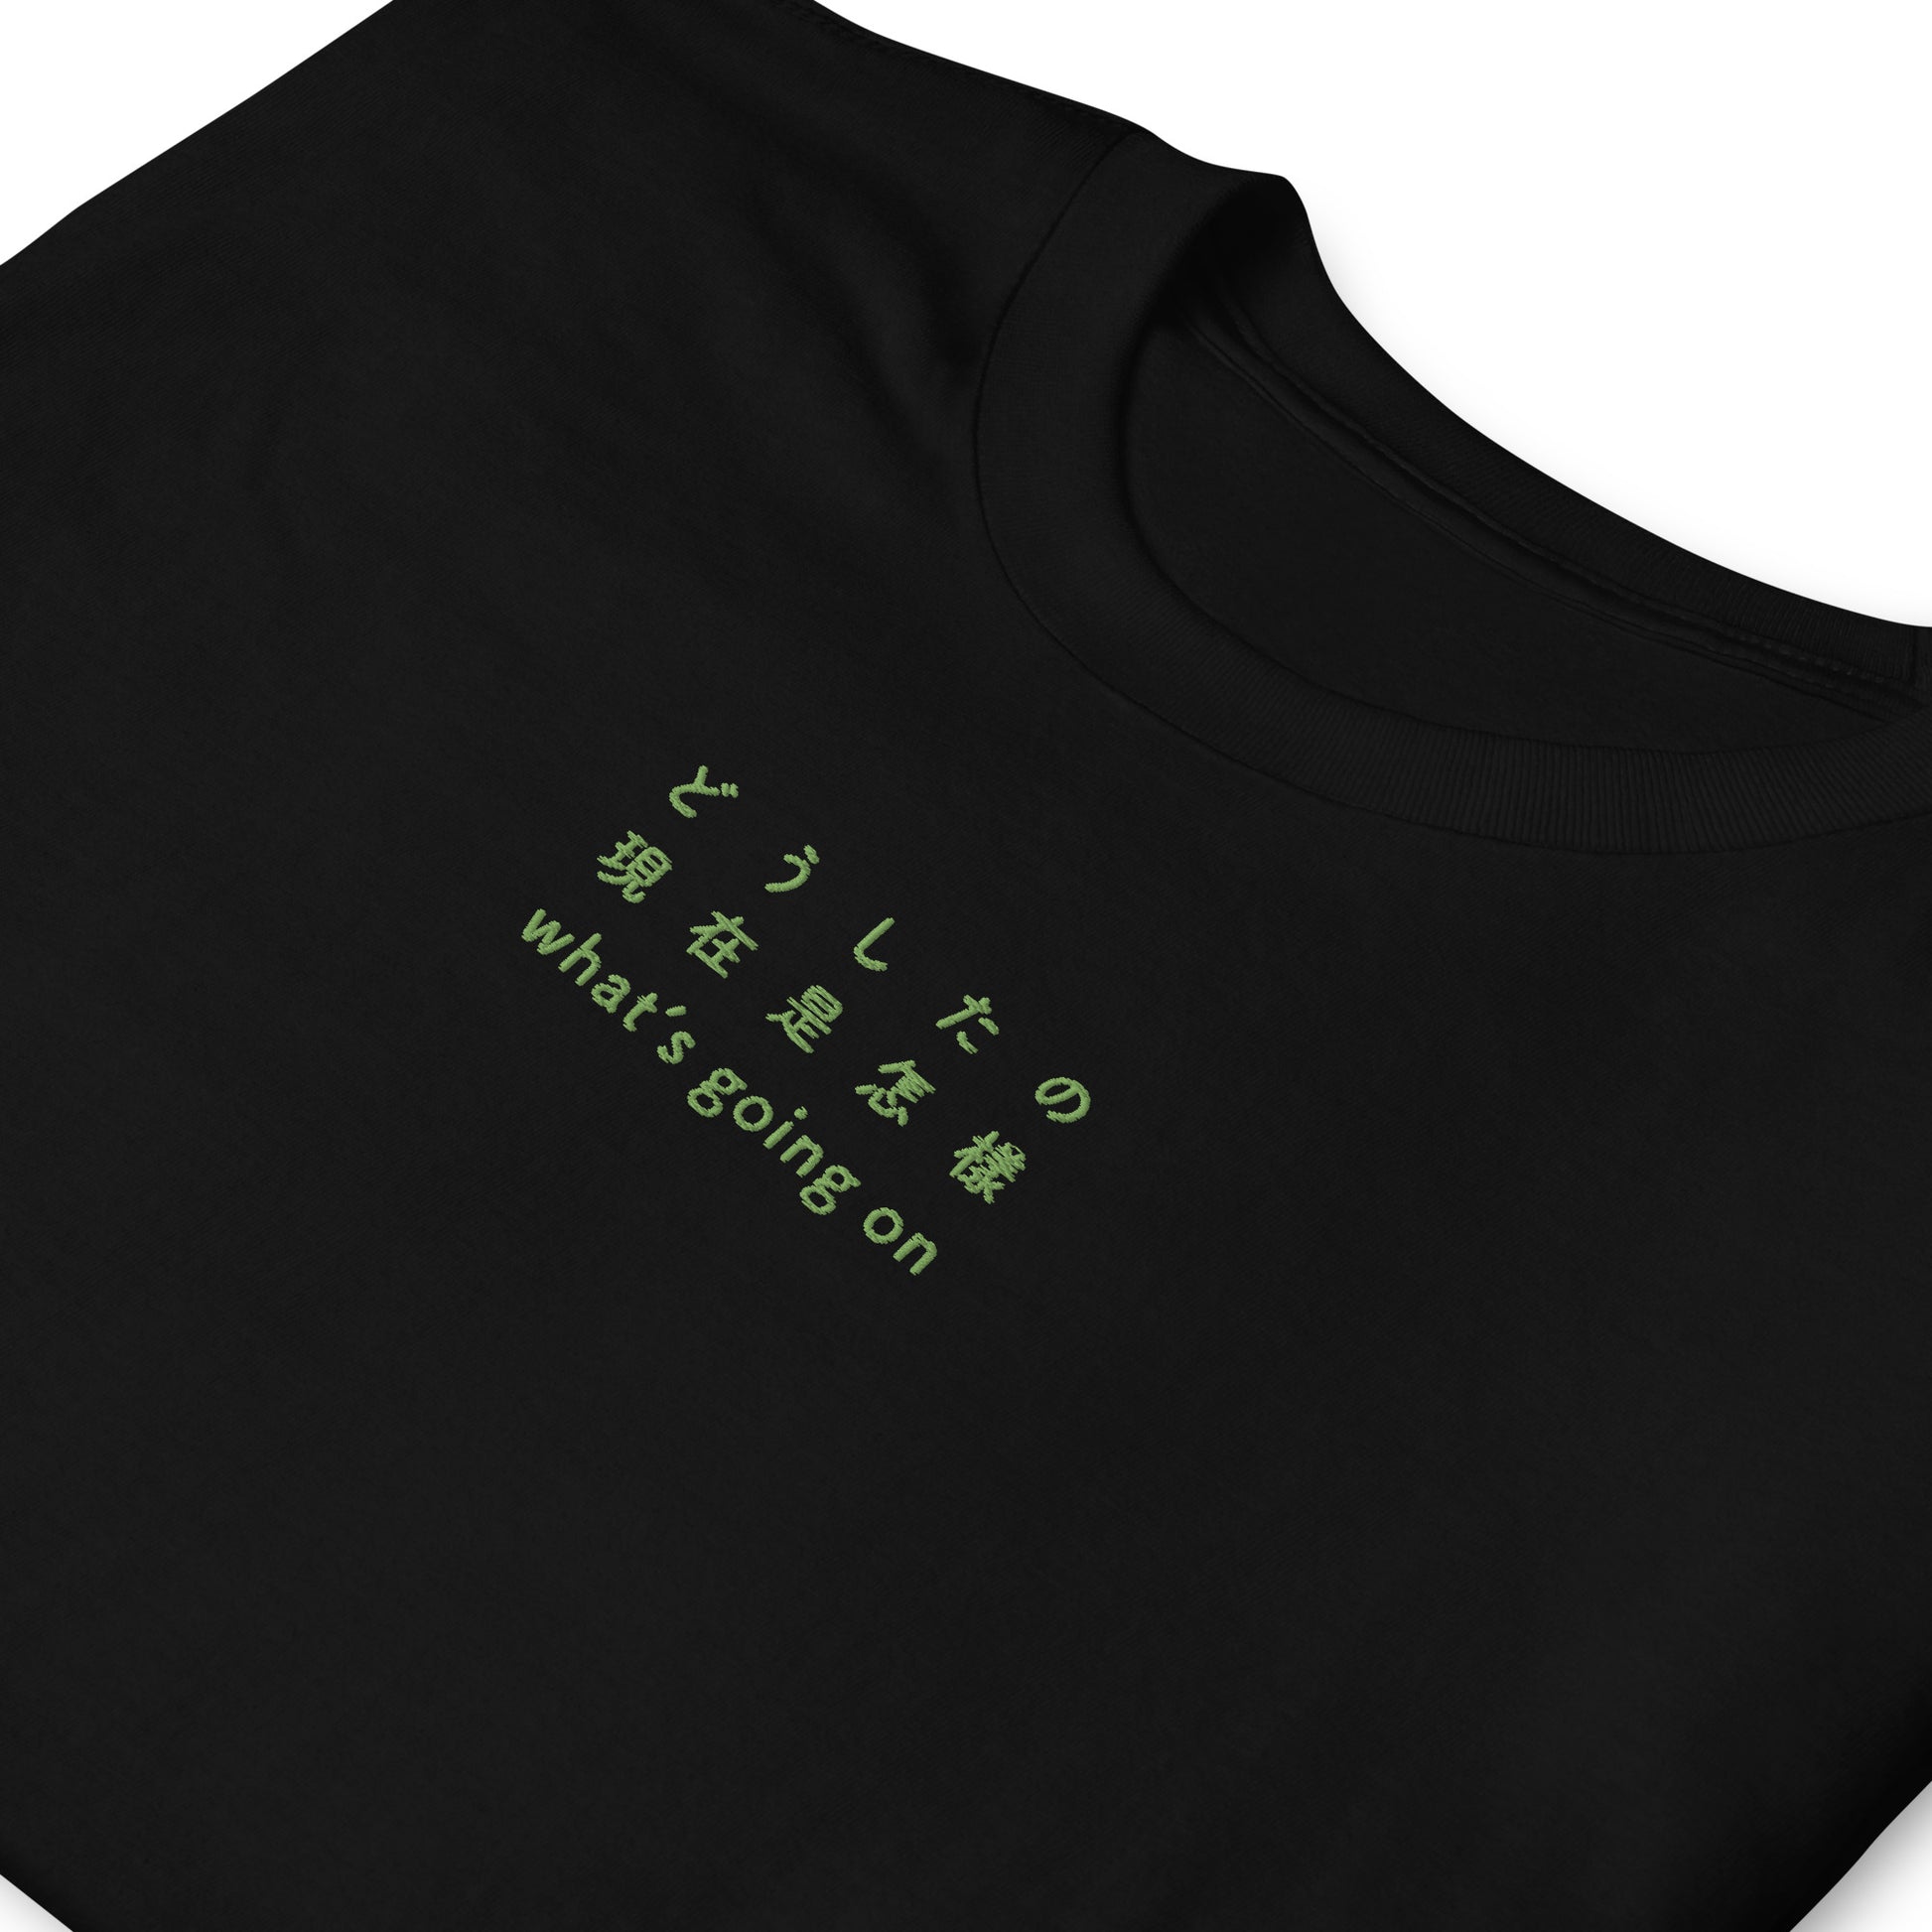 Black High Quality Tee - Front Design with an Green Embroidery "What's going on" in Japanese,Chinese and English